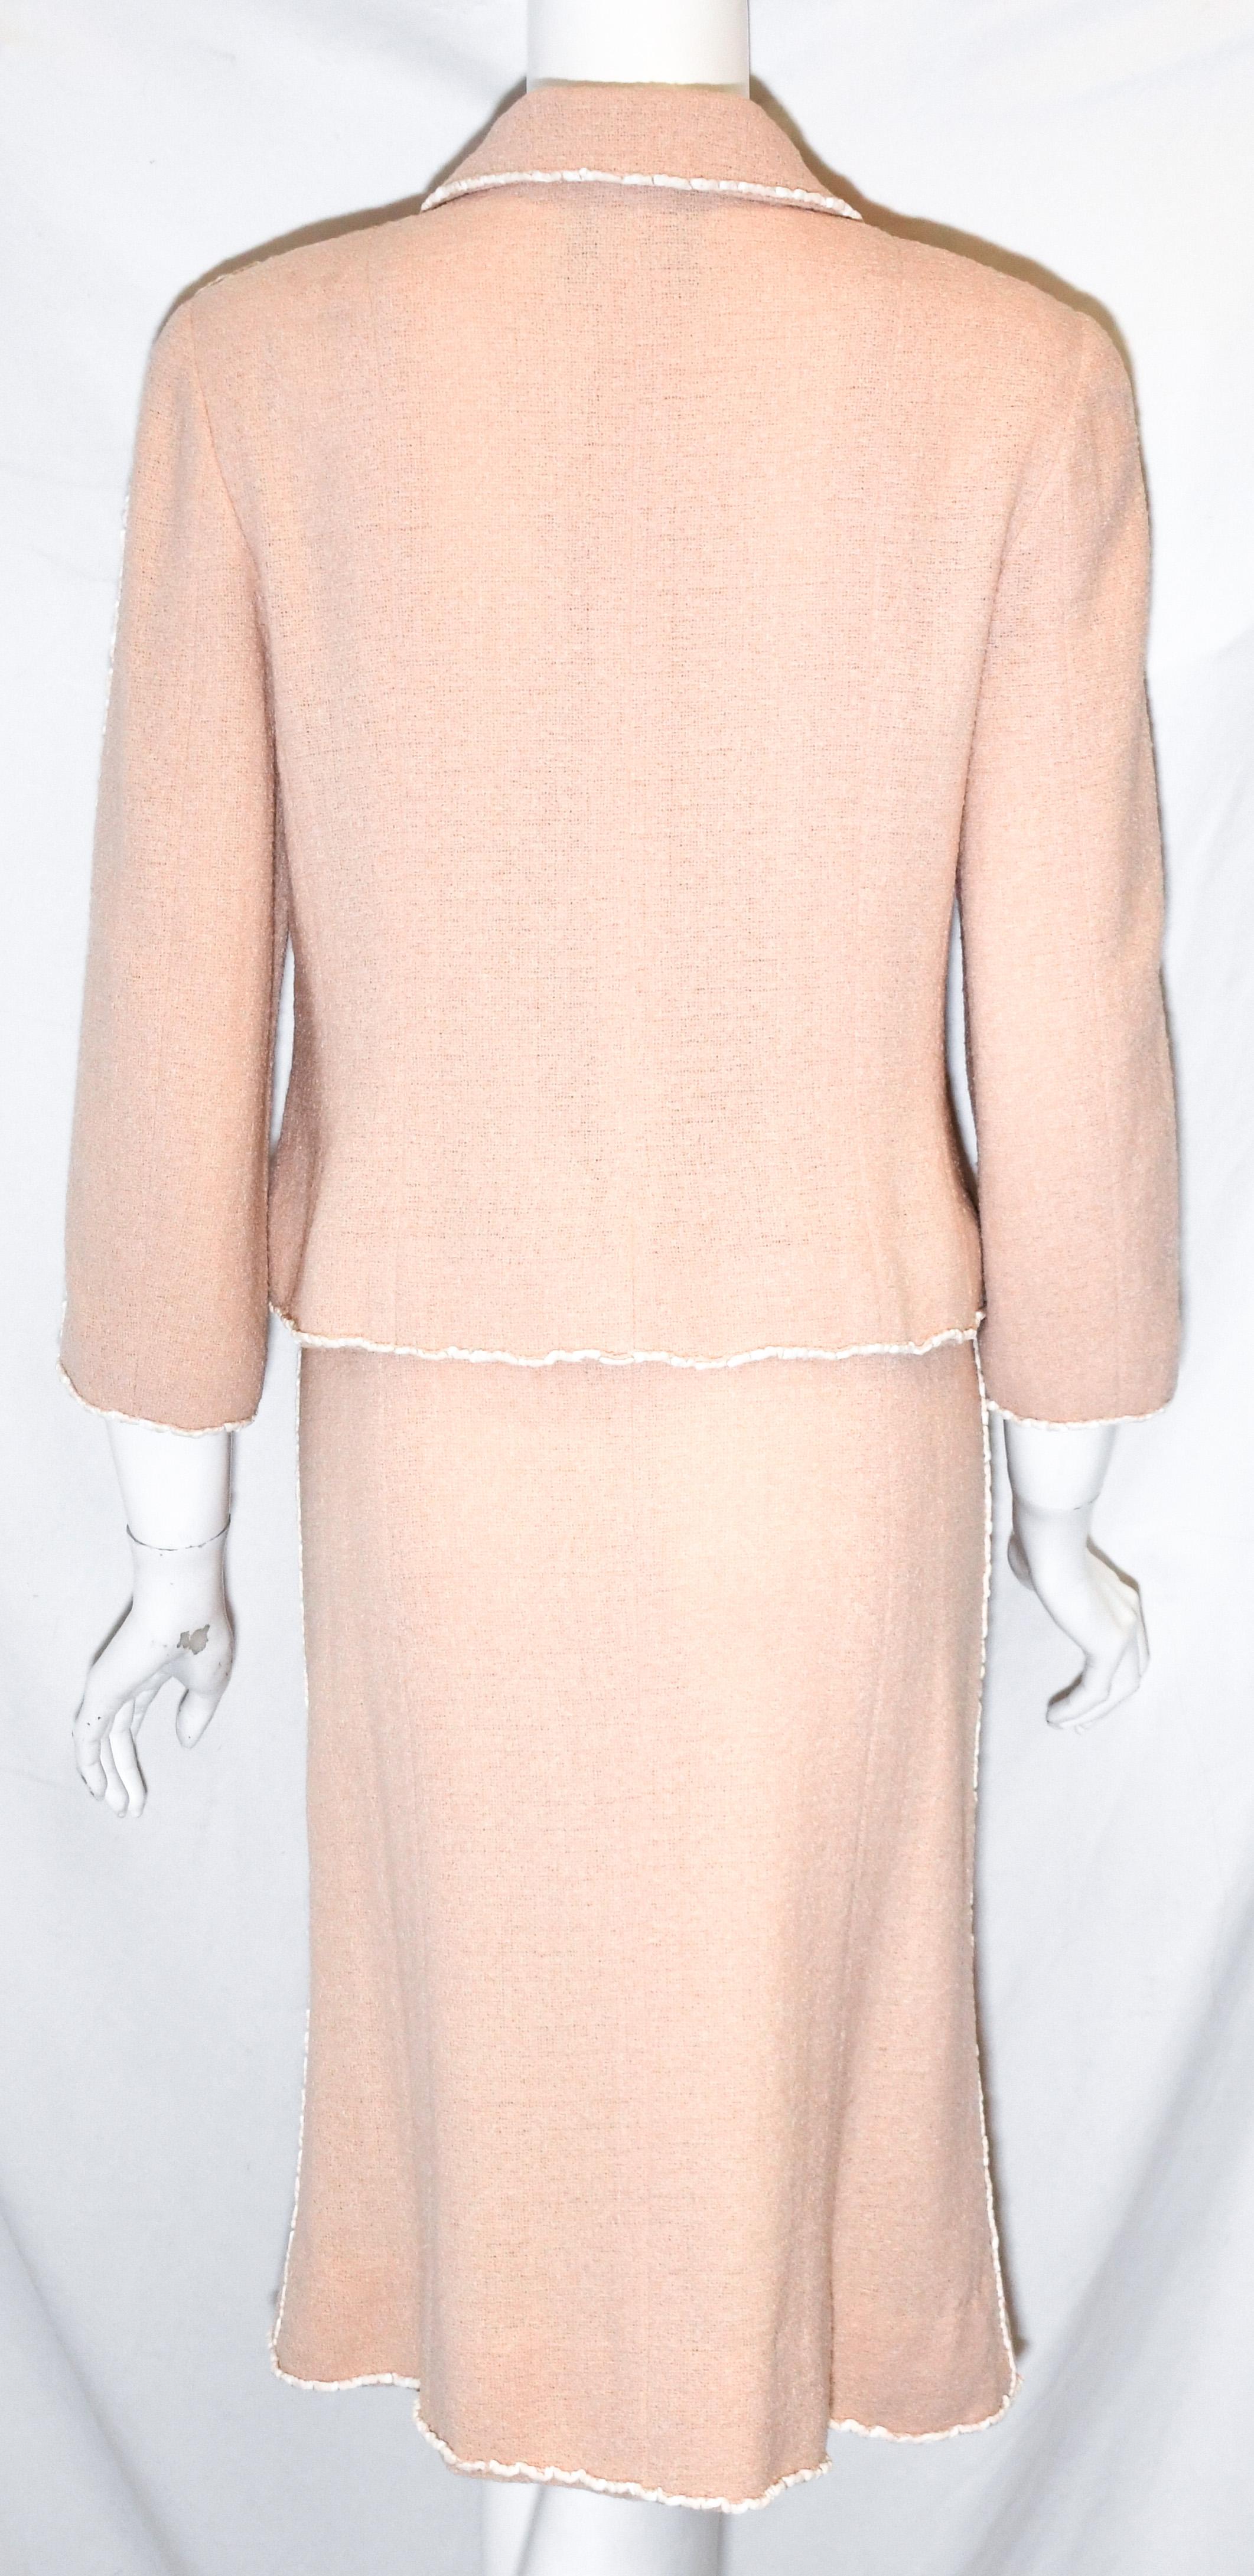 Chanel Peach Wool Blend Skirt Suit with White Trim 36 In Excellent Condition For Sale In Palm Beach, FL